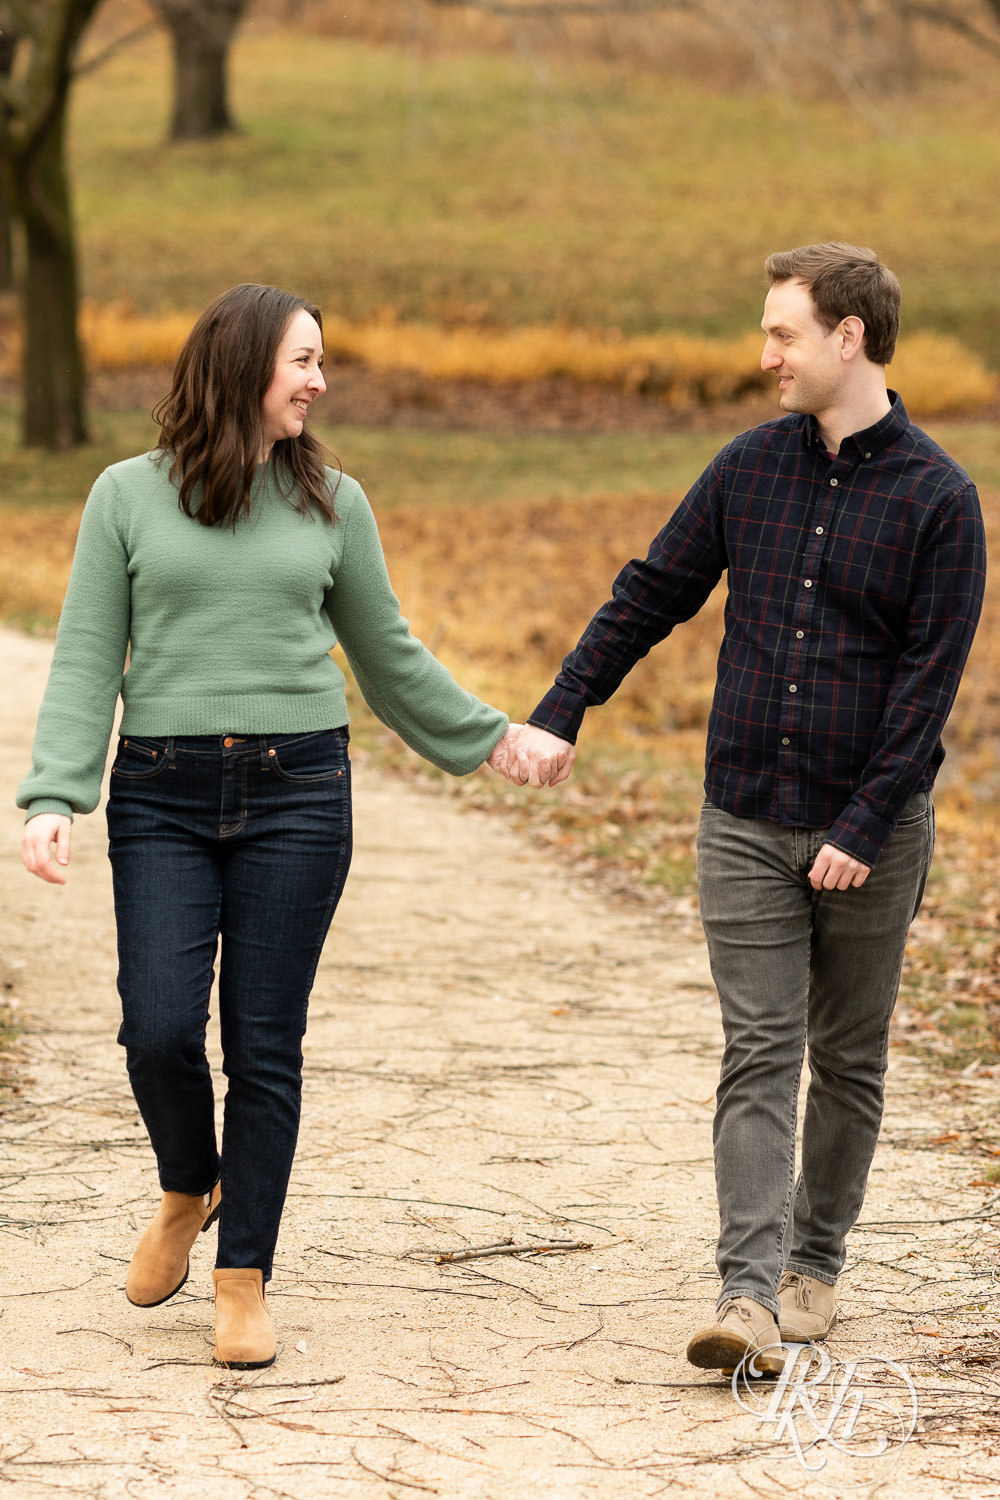 Man and woman walk holding hands during winter engagement photography at Minnesota Landscape Arboretum in Chaska, Minnesota.